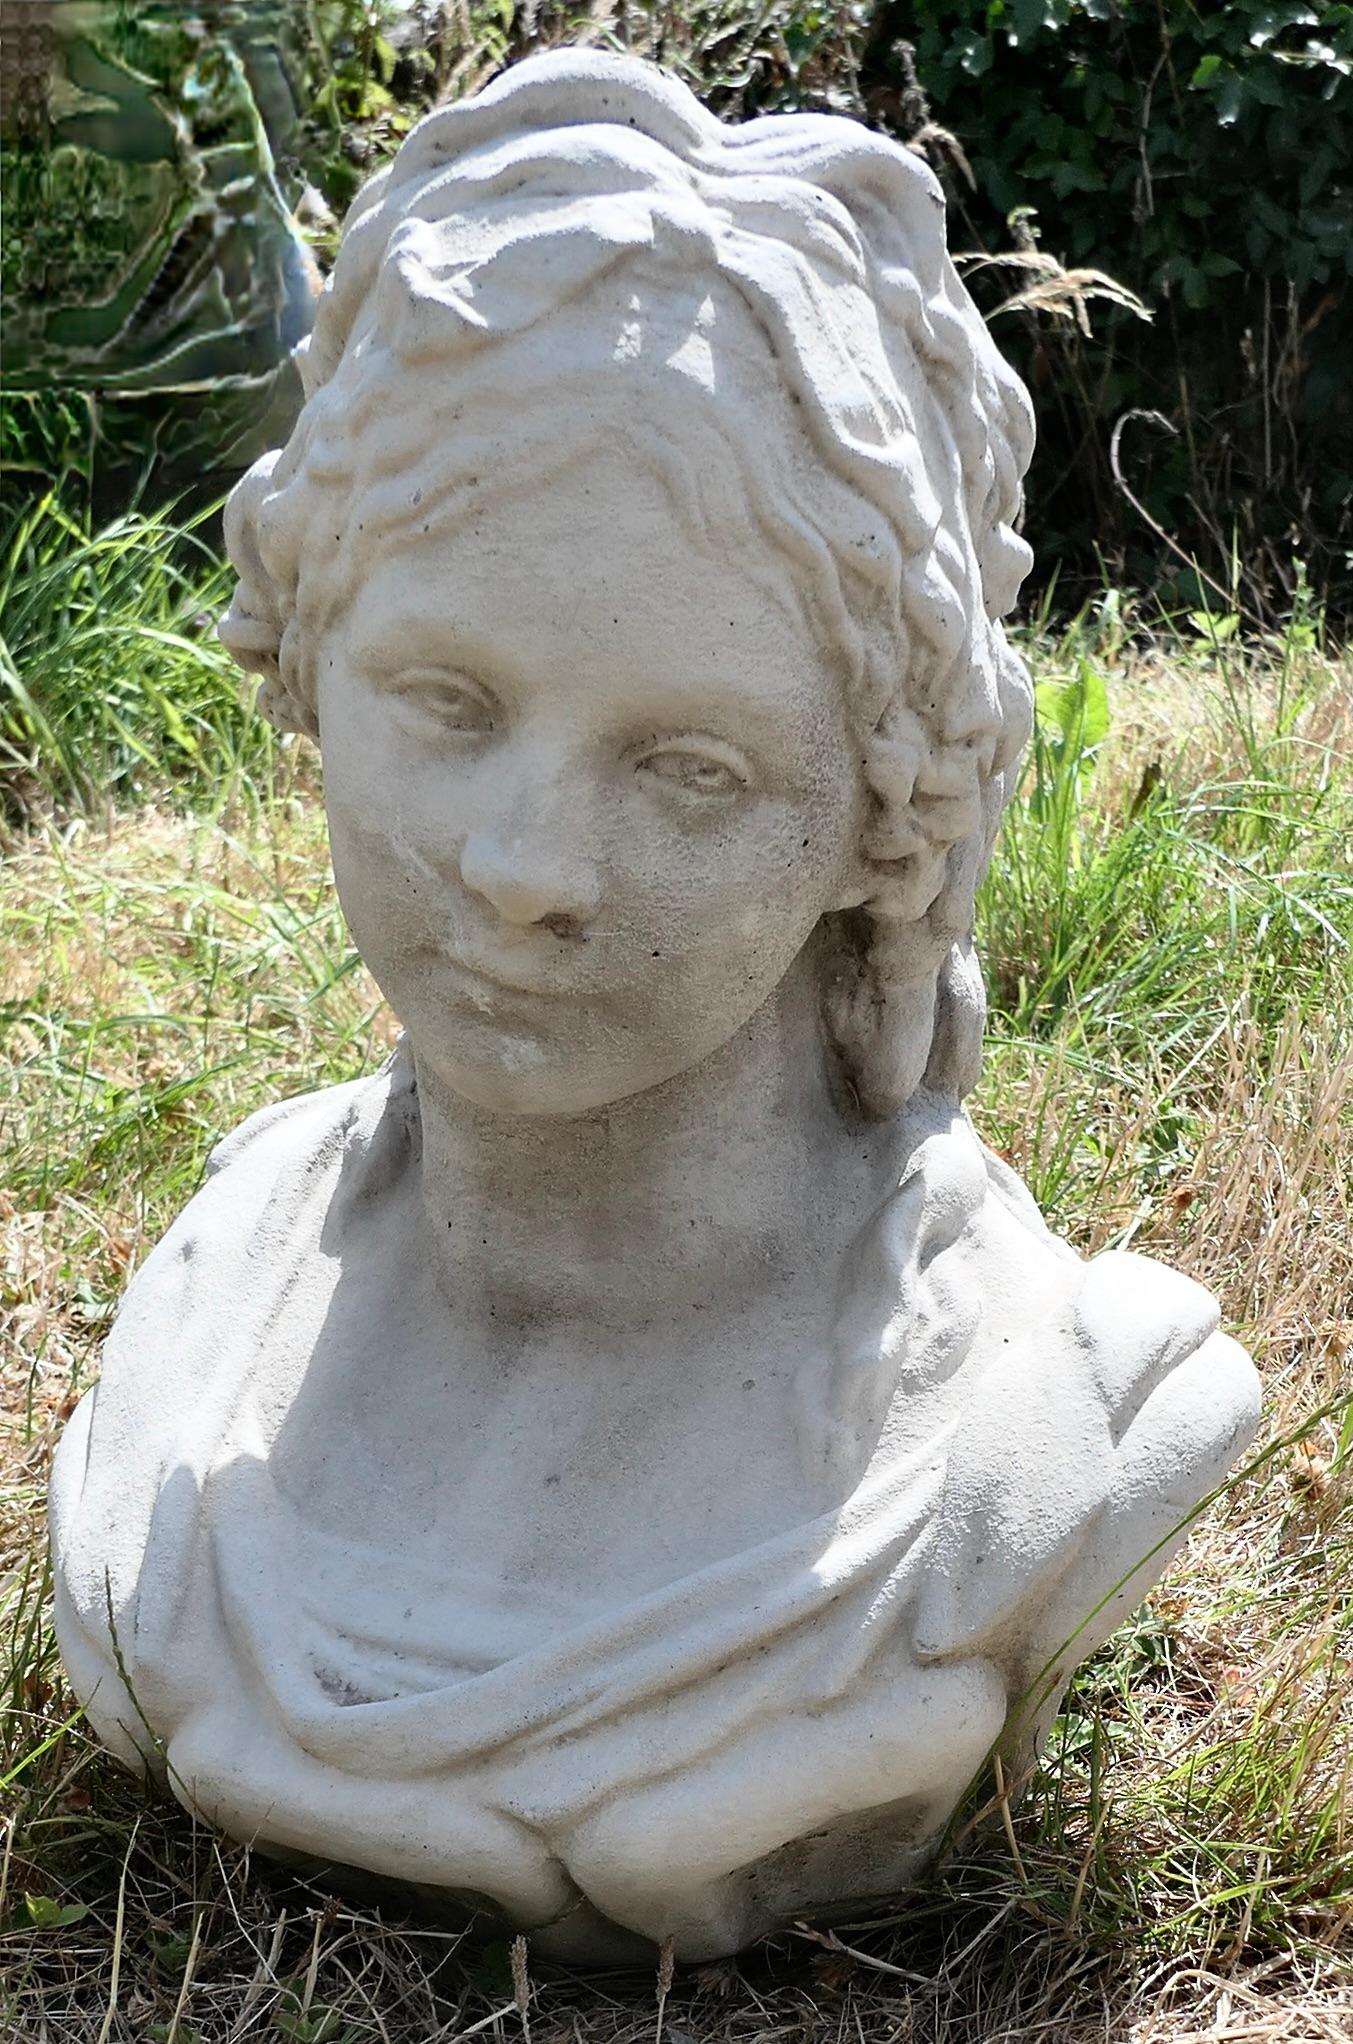 A Good Large Bust of a Regency Lady

A Good Large Bust of a Regency Lady, this is a good quality bust, it is made in a stone compound and has a slightly weathered patina 
This is an elegant likeness of a character from the early 19th Century